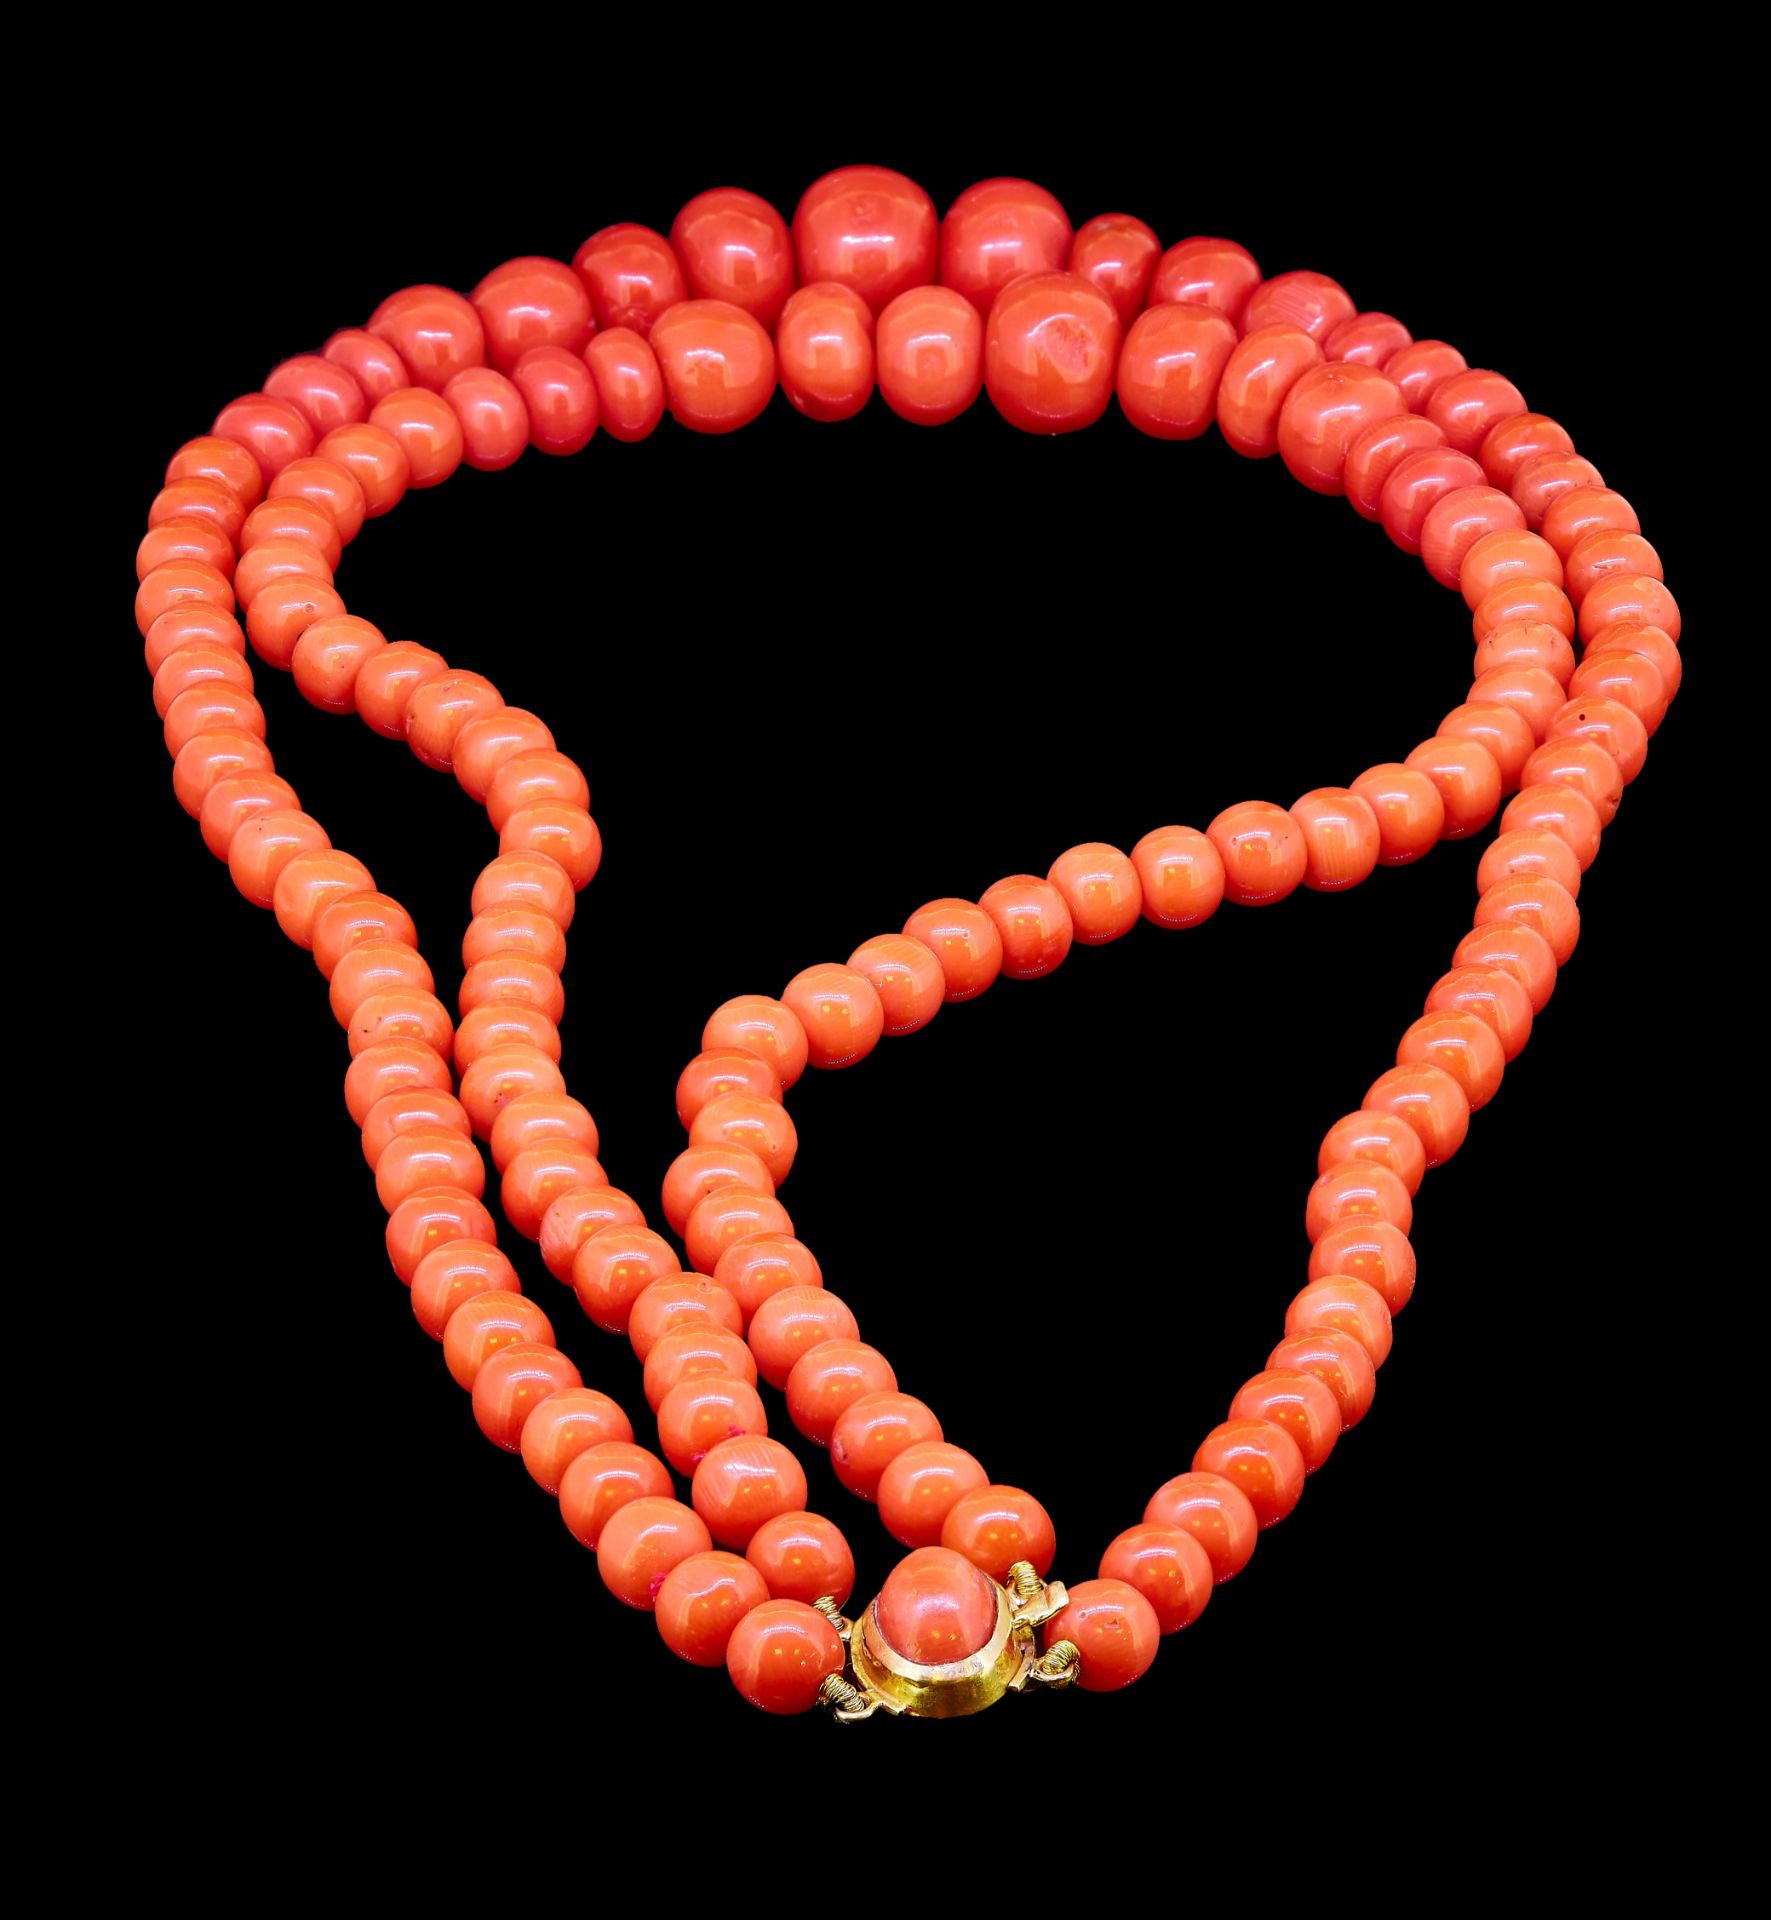 2-ROW CORAL NECKLACE - Image 2 of 2